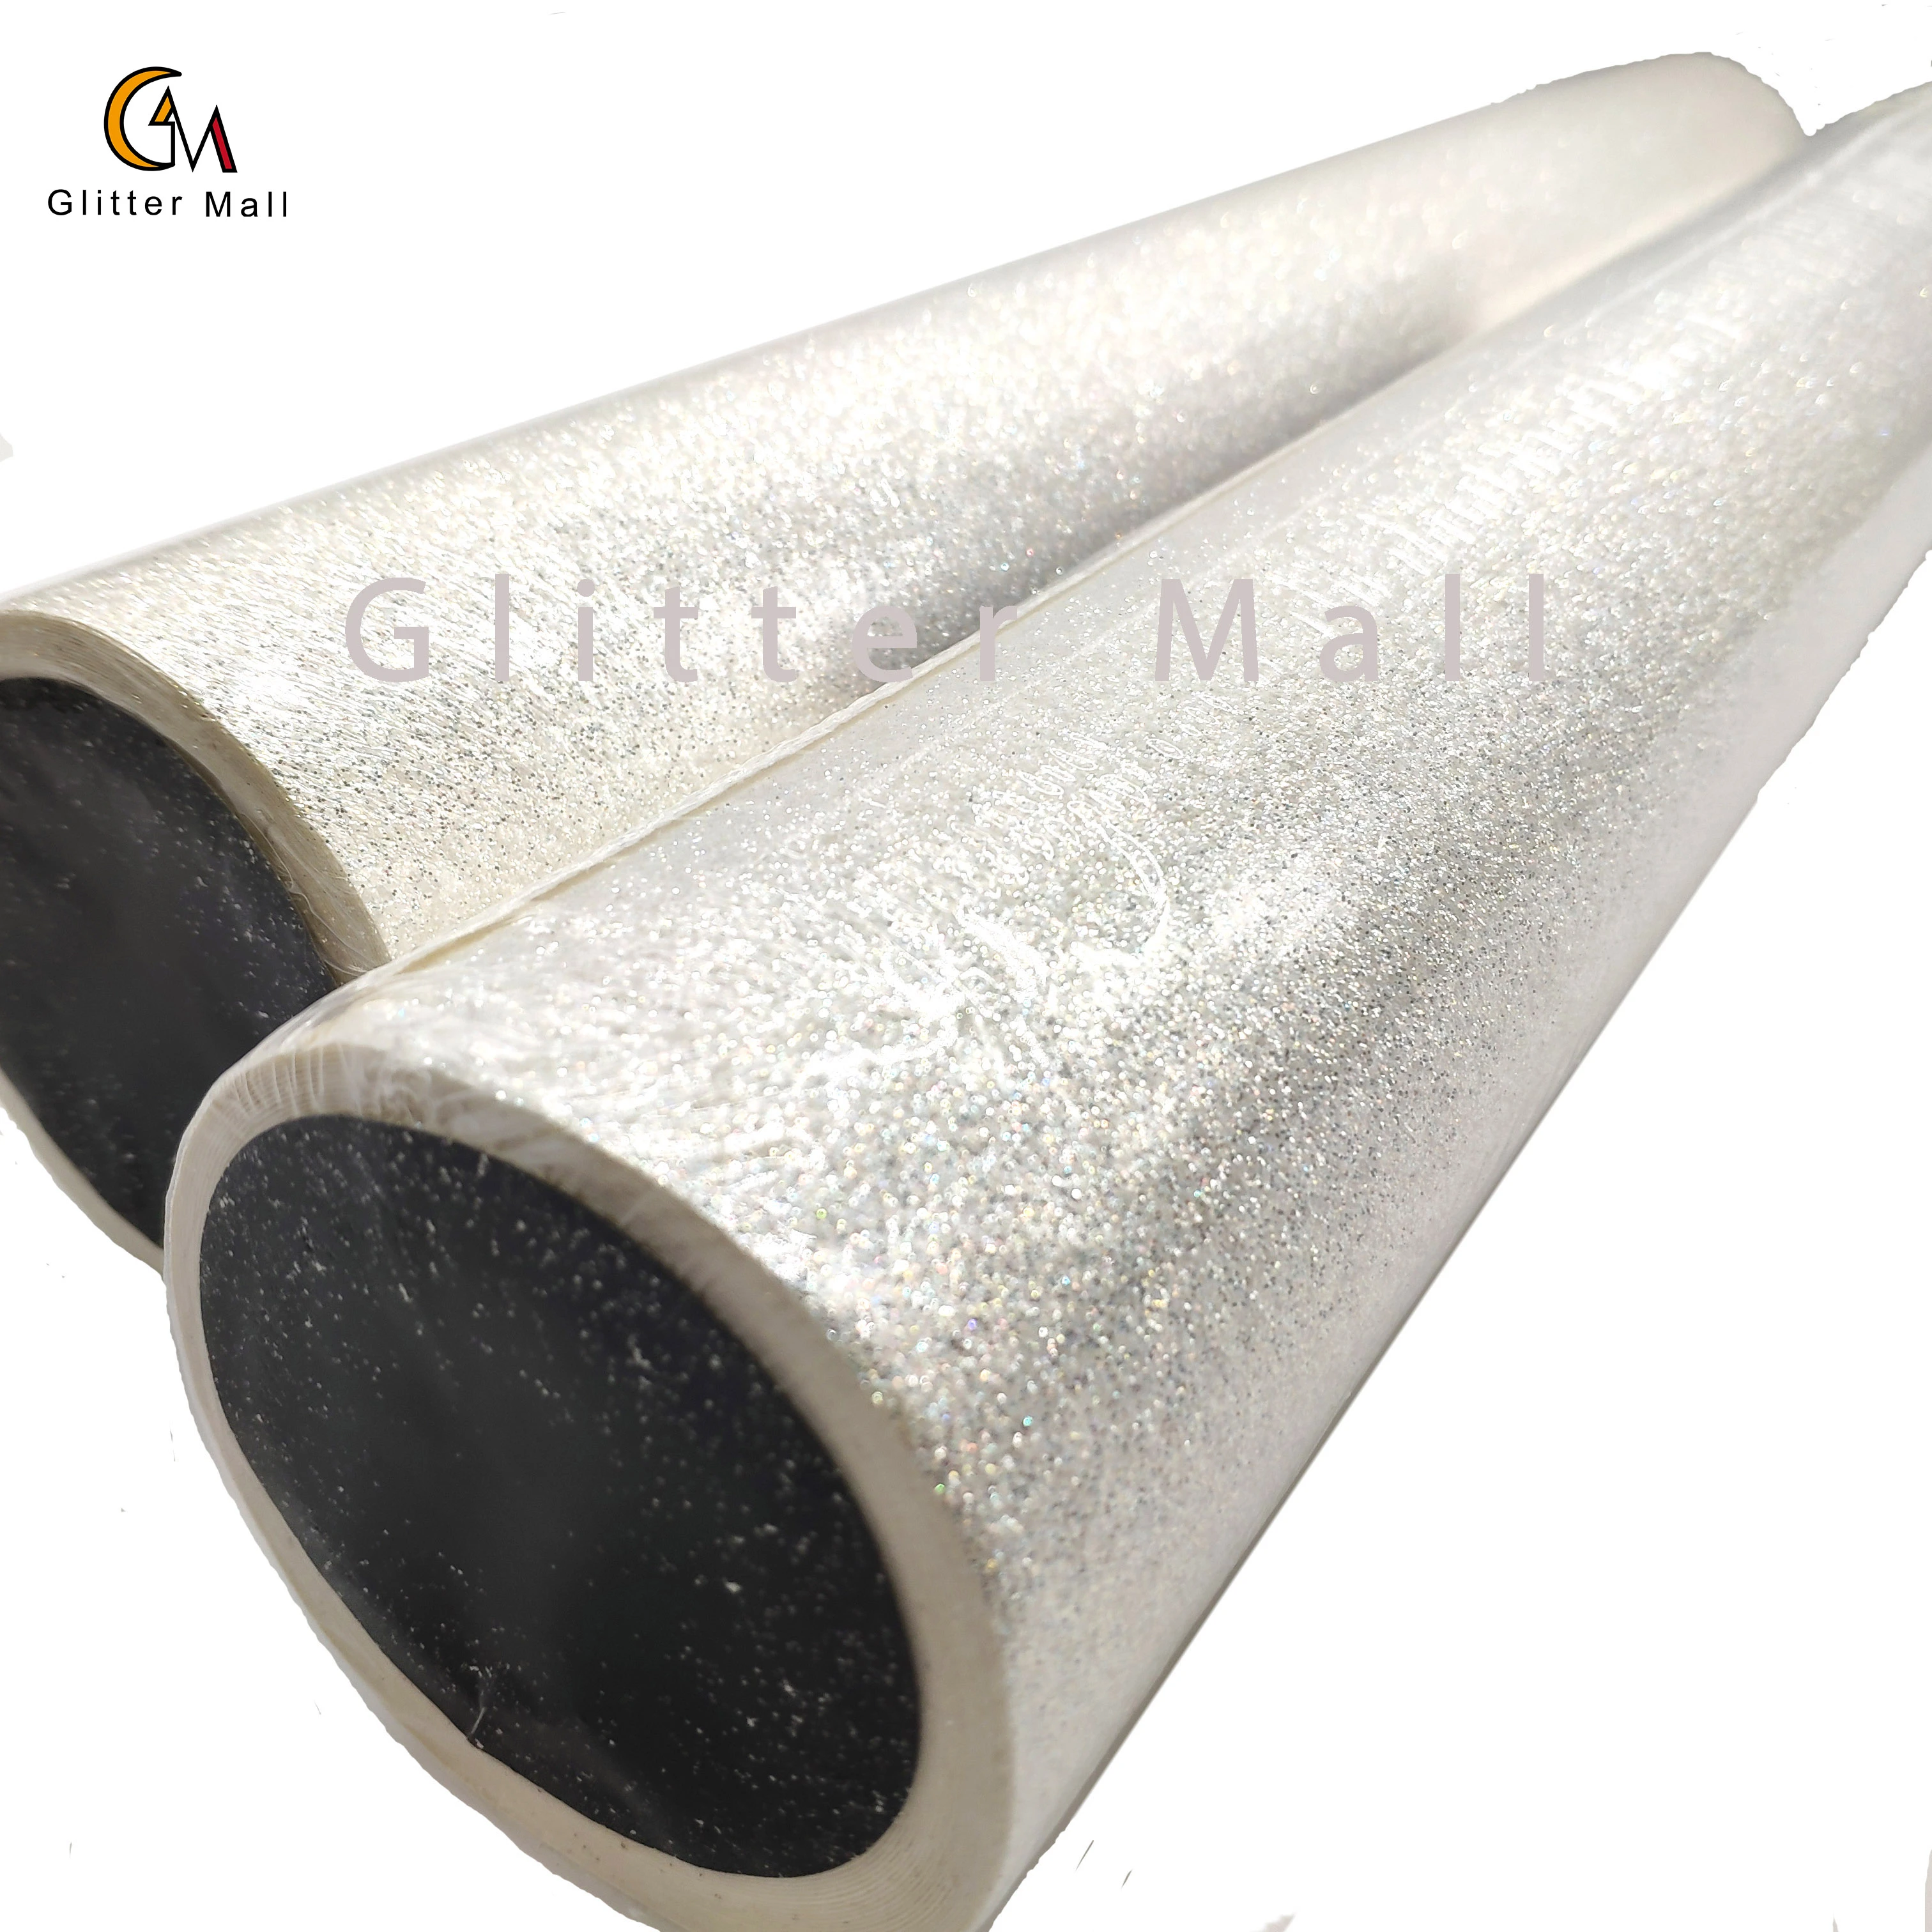 Hot Sale High Quality Glitter Waterproof Wallpaper for wall Paper Peel Stick Wallpaper Home Decorative